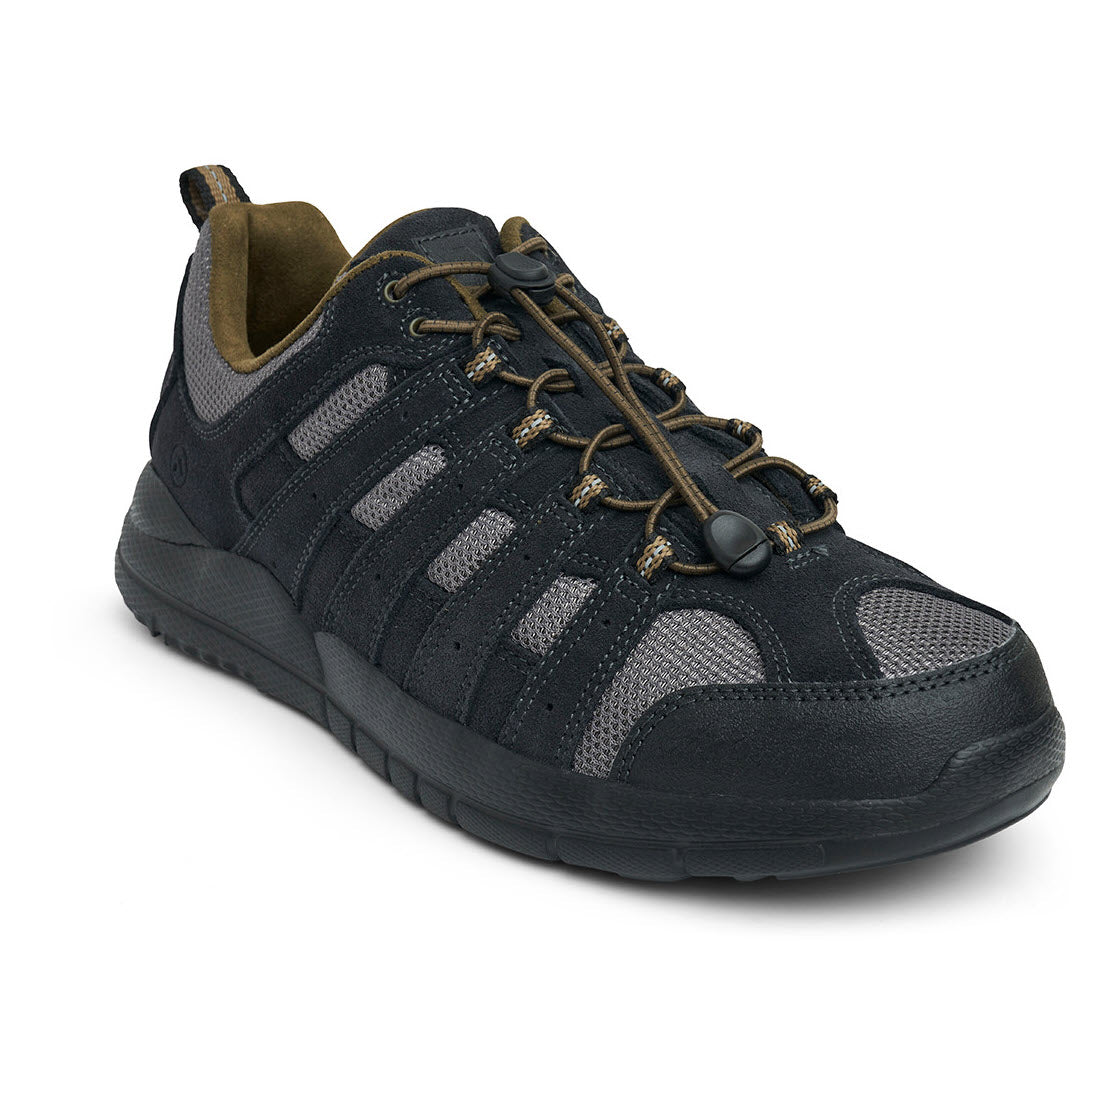 A single black Anodyne Trail Walker Dark Grey hiking shoe with mesh inserts and a pull tab on the heel, featuring dark laces and a rugged sole.